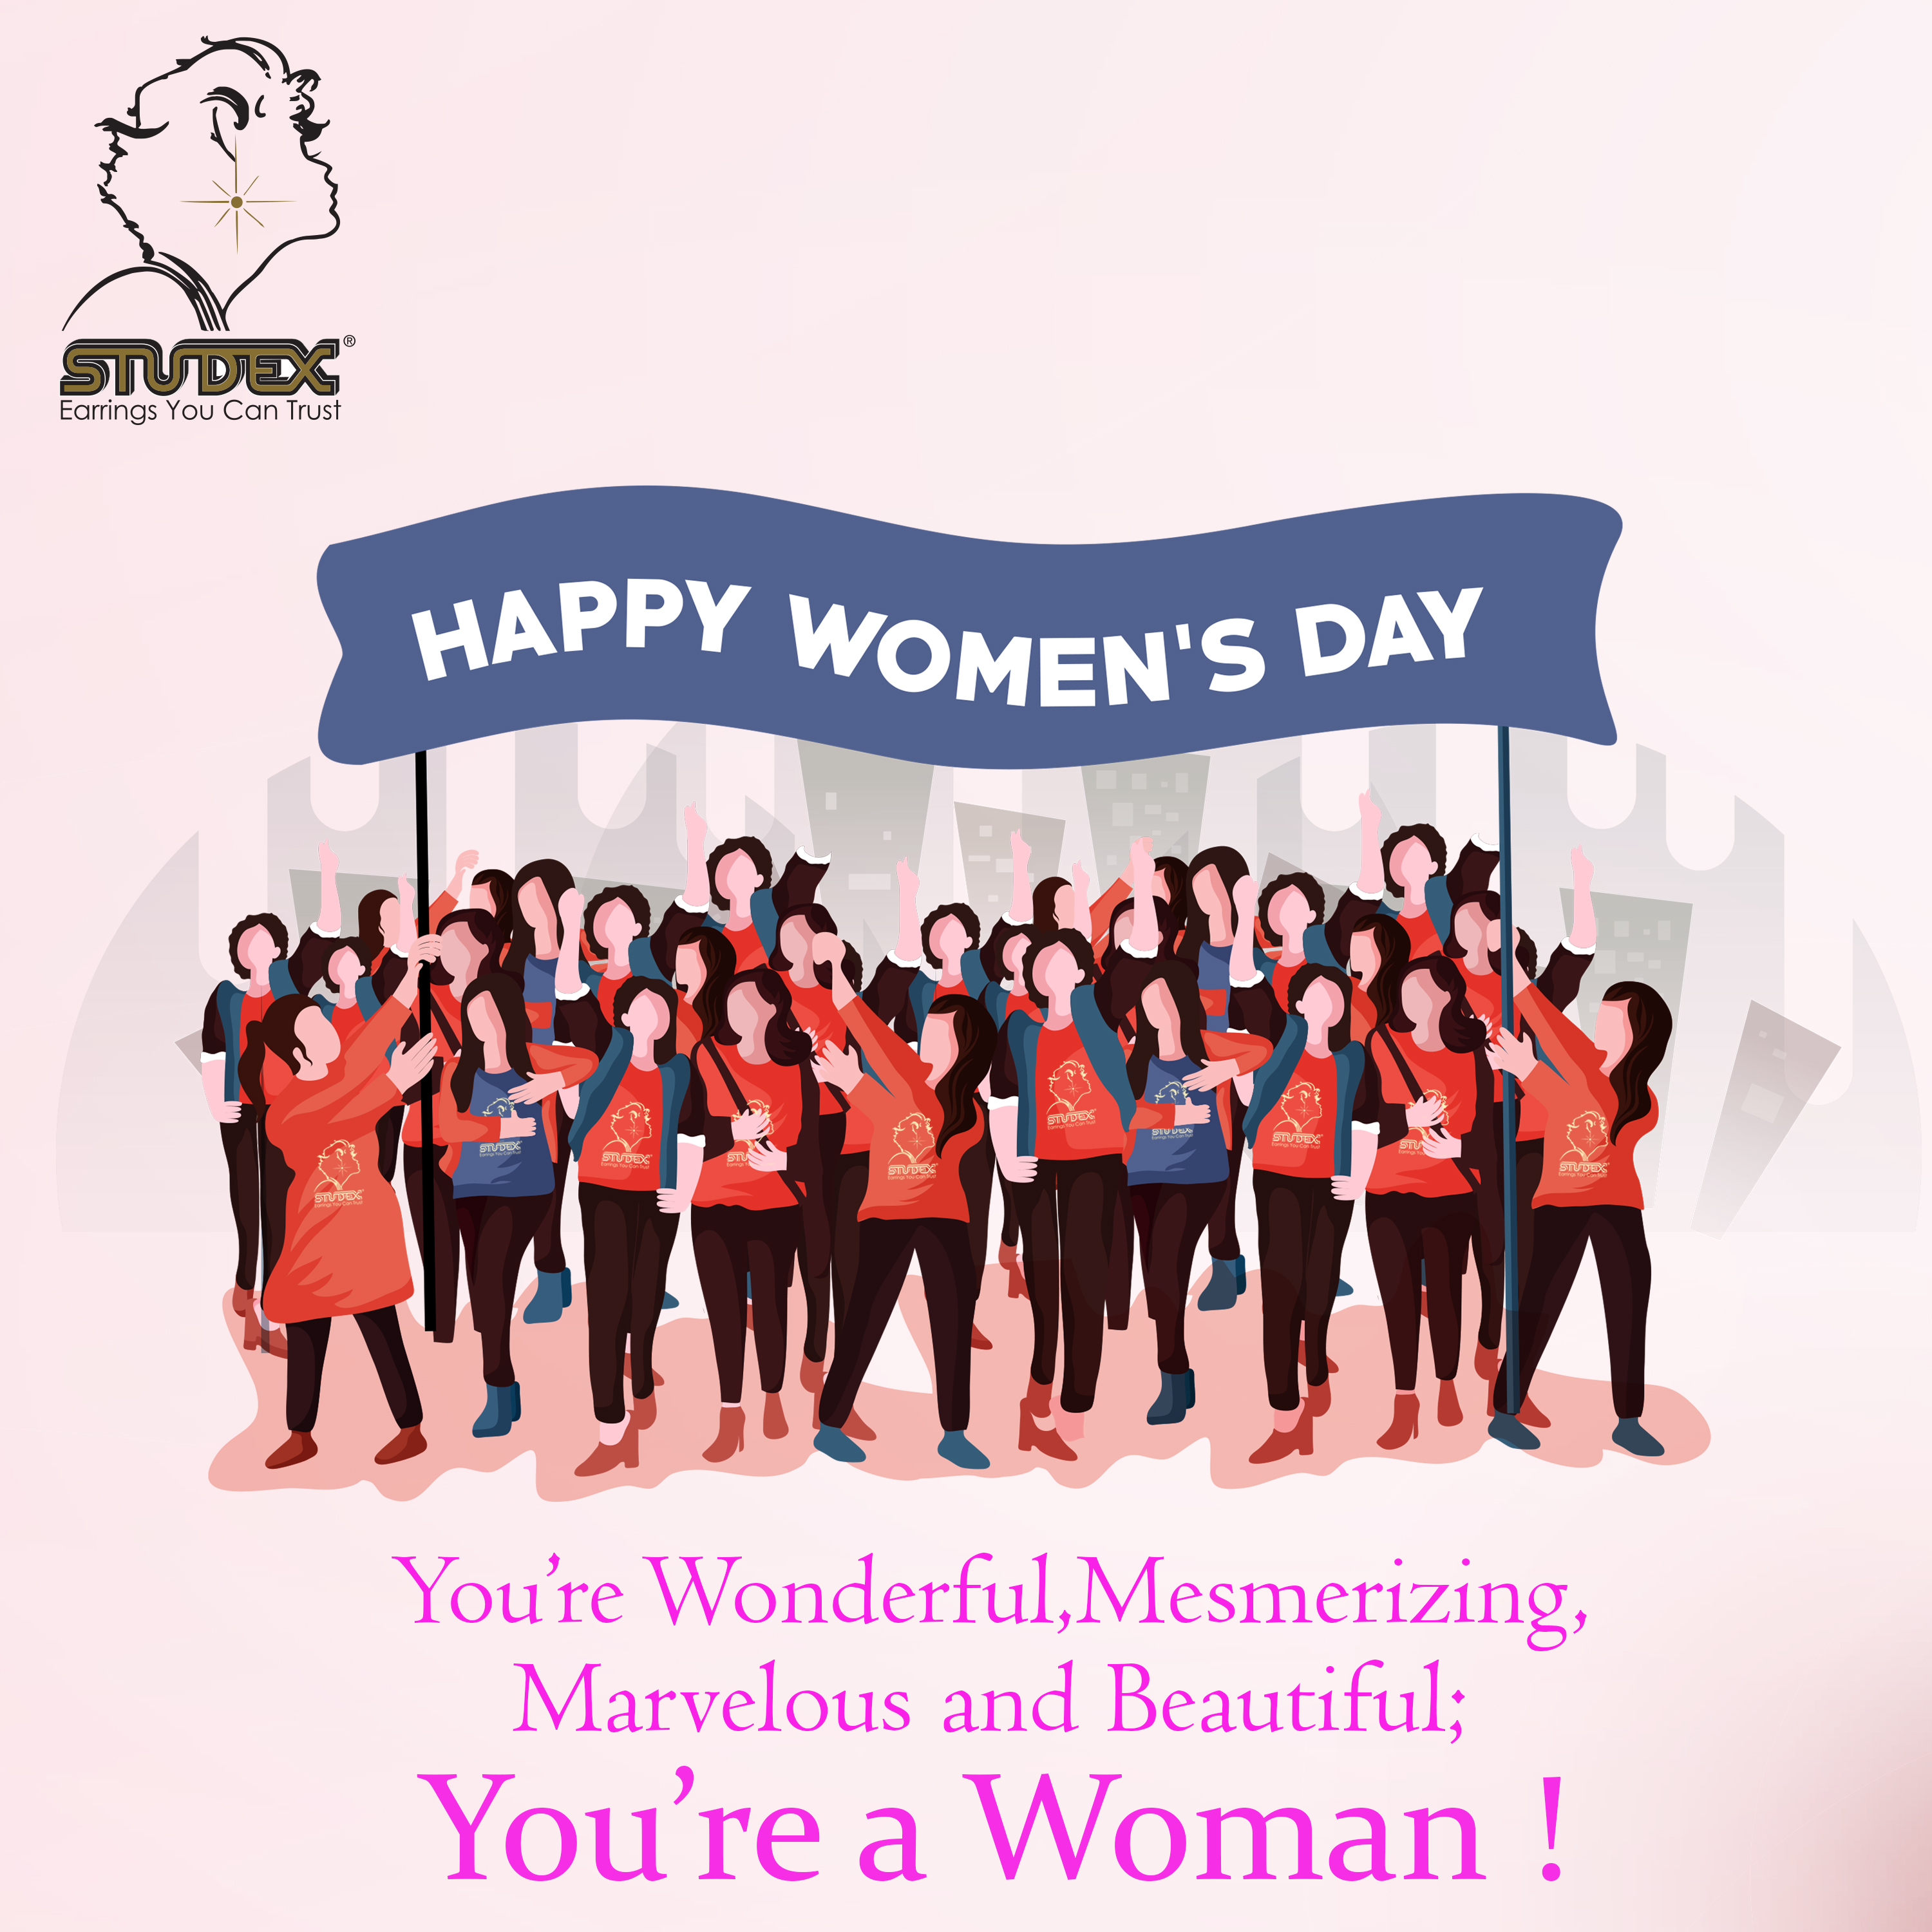 Happy Women’s Day ! You are Wonderful, Mesmerizing, Marvelous, Beautiful.  You are a woman